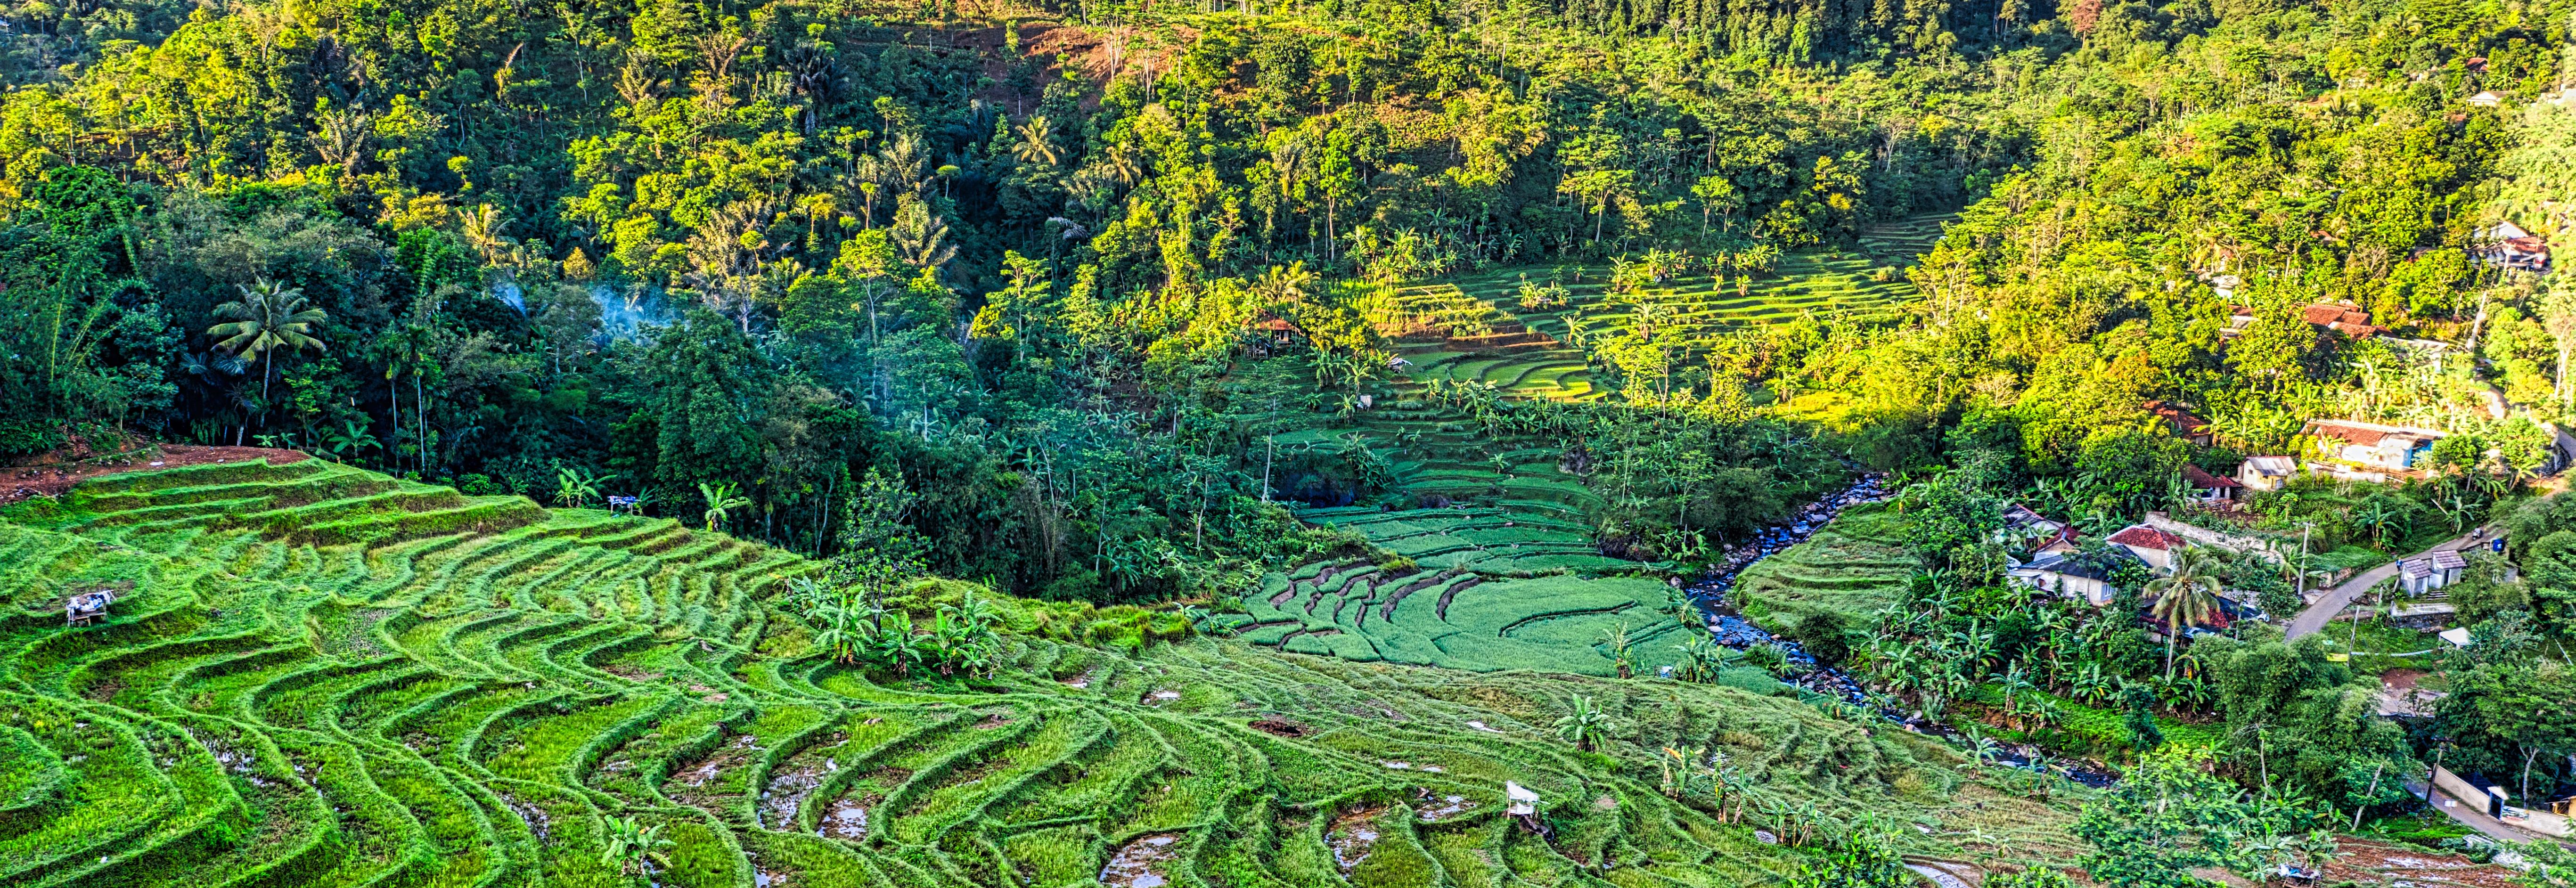 Rice fields and village in forest